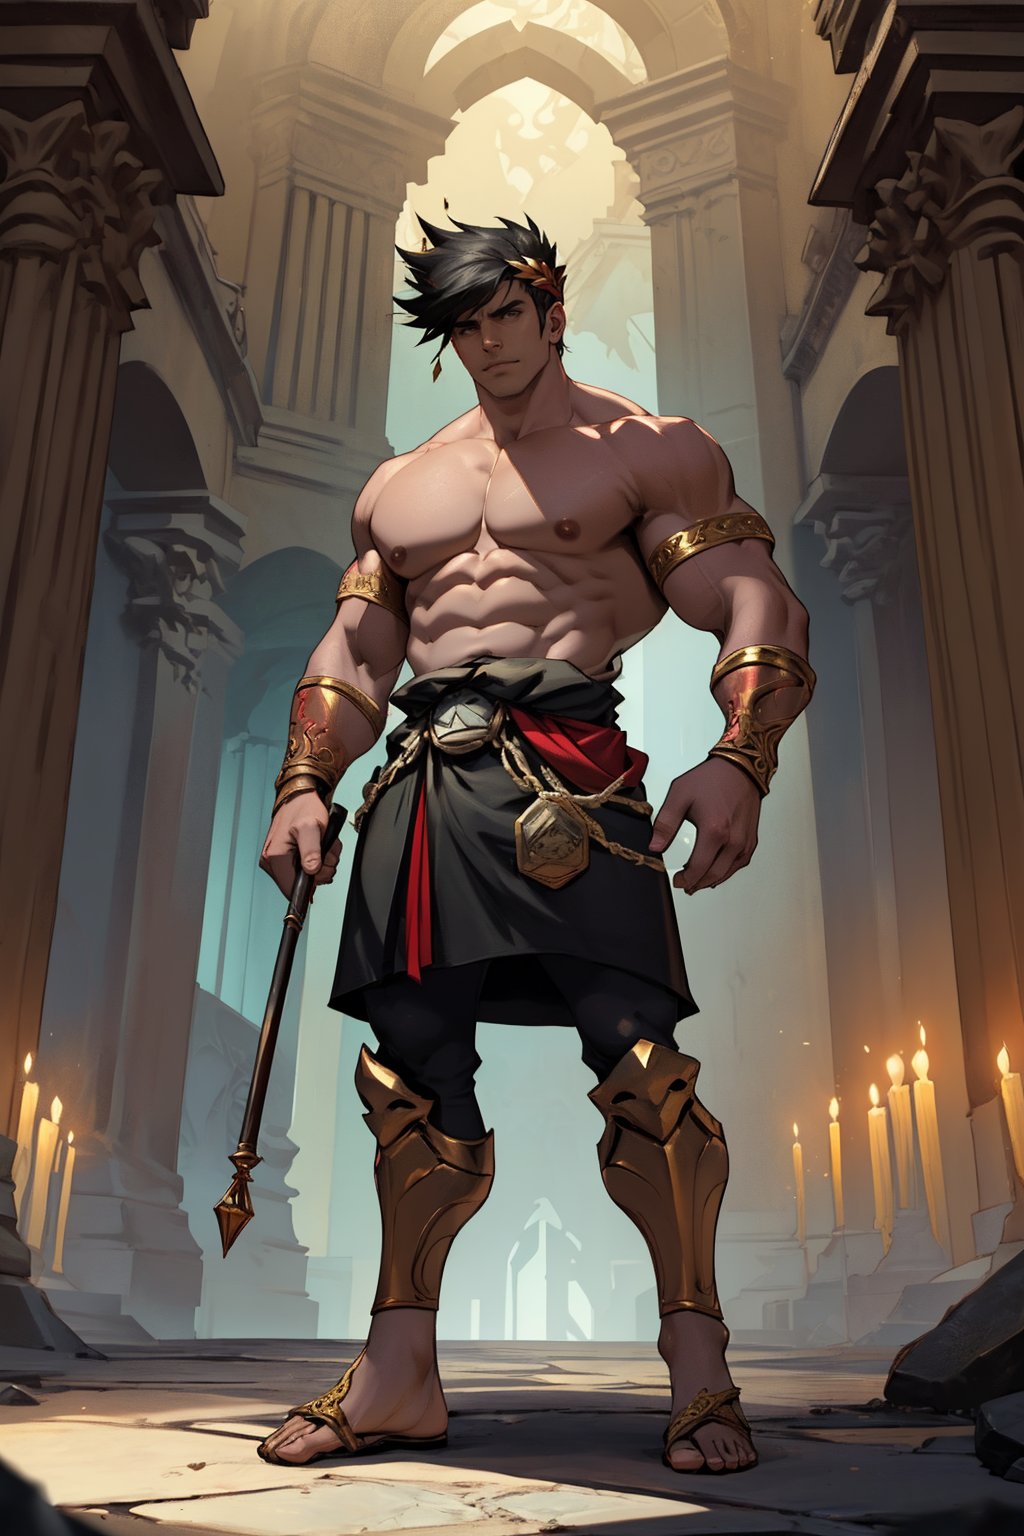 Zagreus stands confidently, his massive physique dominating the darkened temple's dimly lit chamber. Framed by the archway, his broad shoulders and powerful arms are accentuated by the shadows, while his chiseled chest and defined abs seem to gleam in the faint torchlight. The air thick with ancient incense, Zagreus' piercing gaze casts an unyielding glare, his presence commanding attention as he stands resolute before the ornate altar.